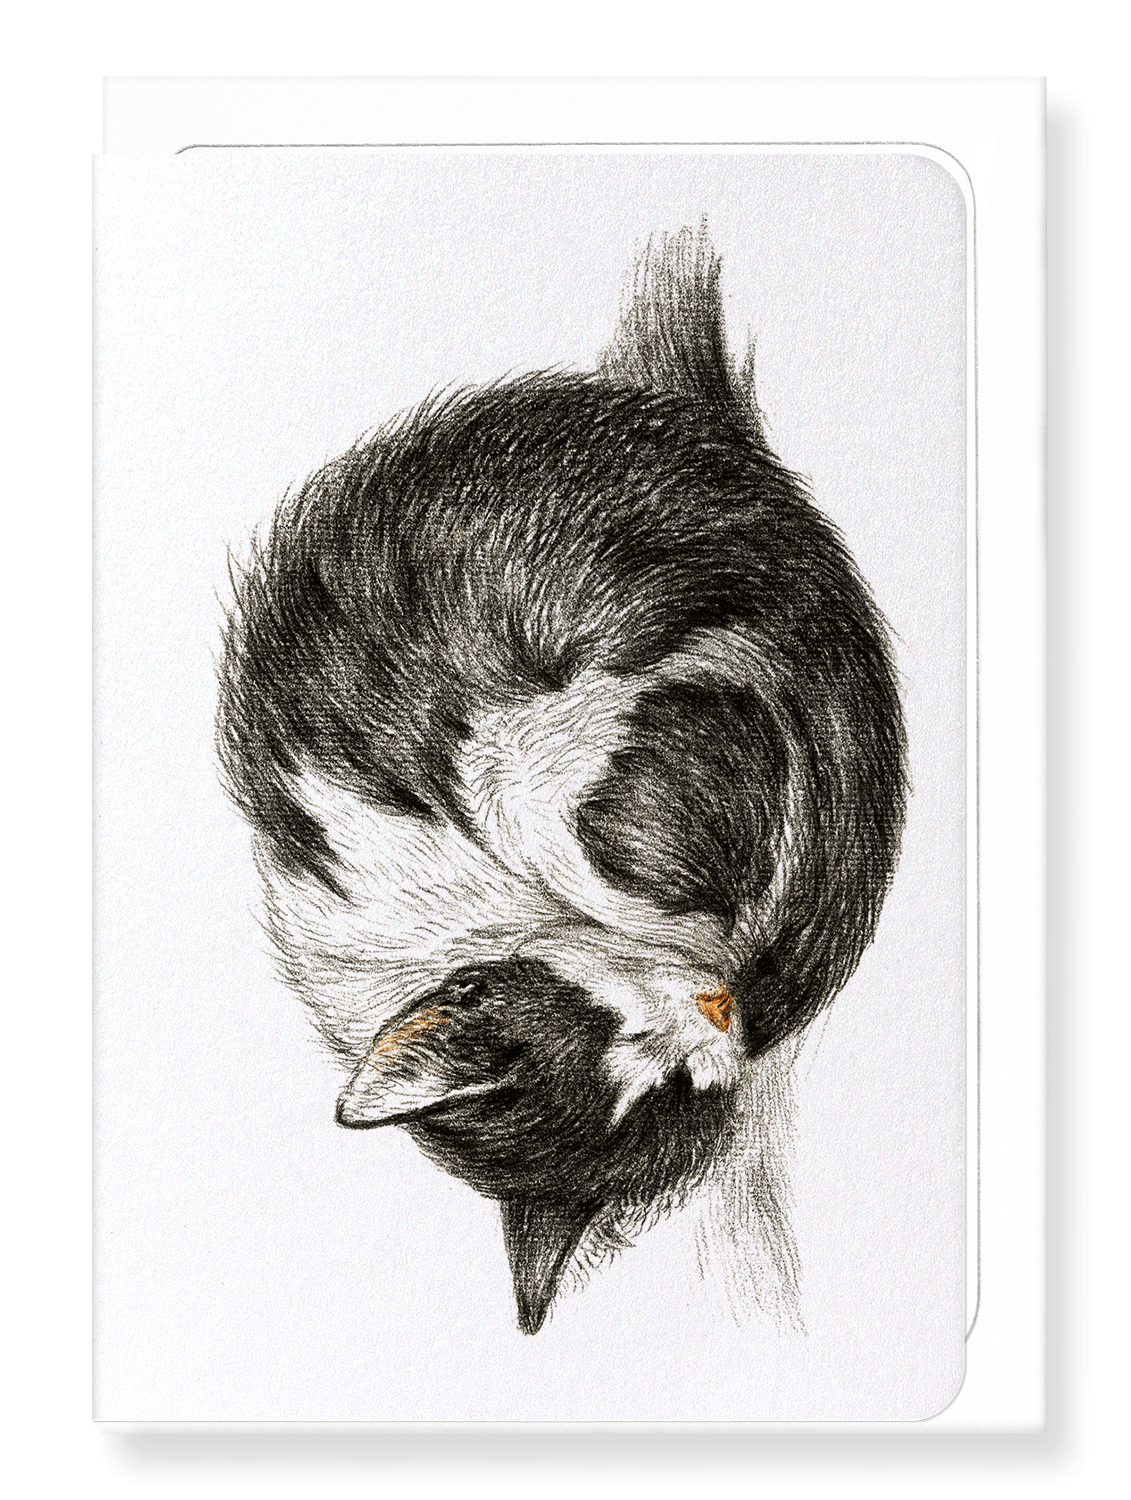 Ezen Designs - Curled up sleeping cat (1825) - Greeting Card - Front